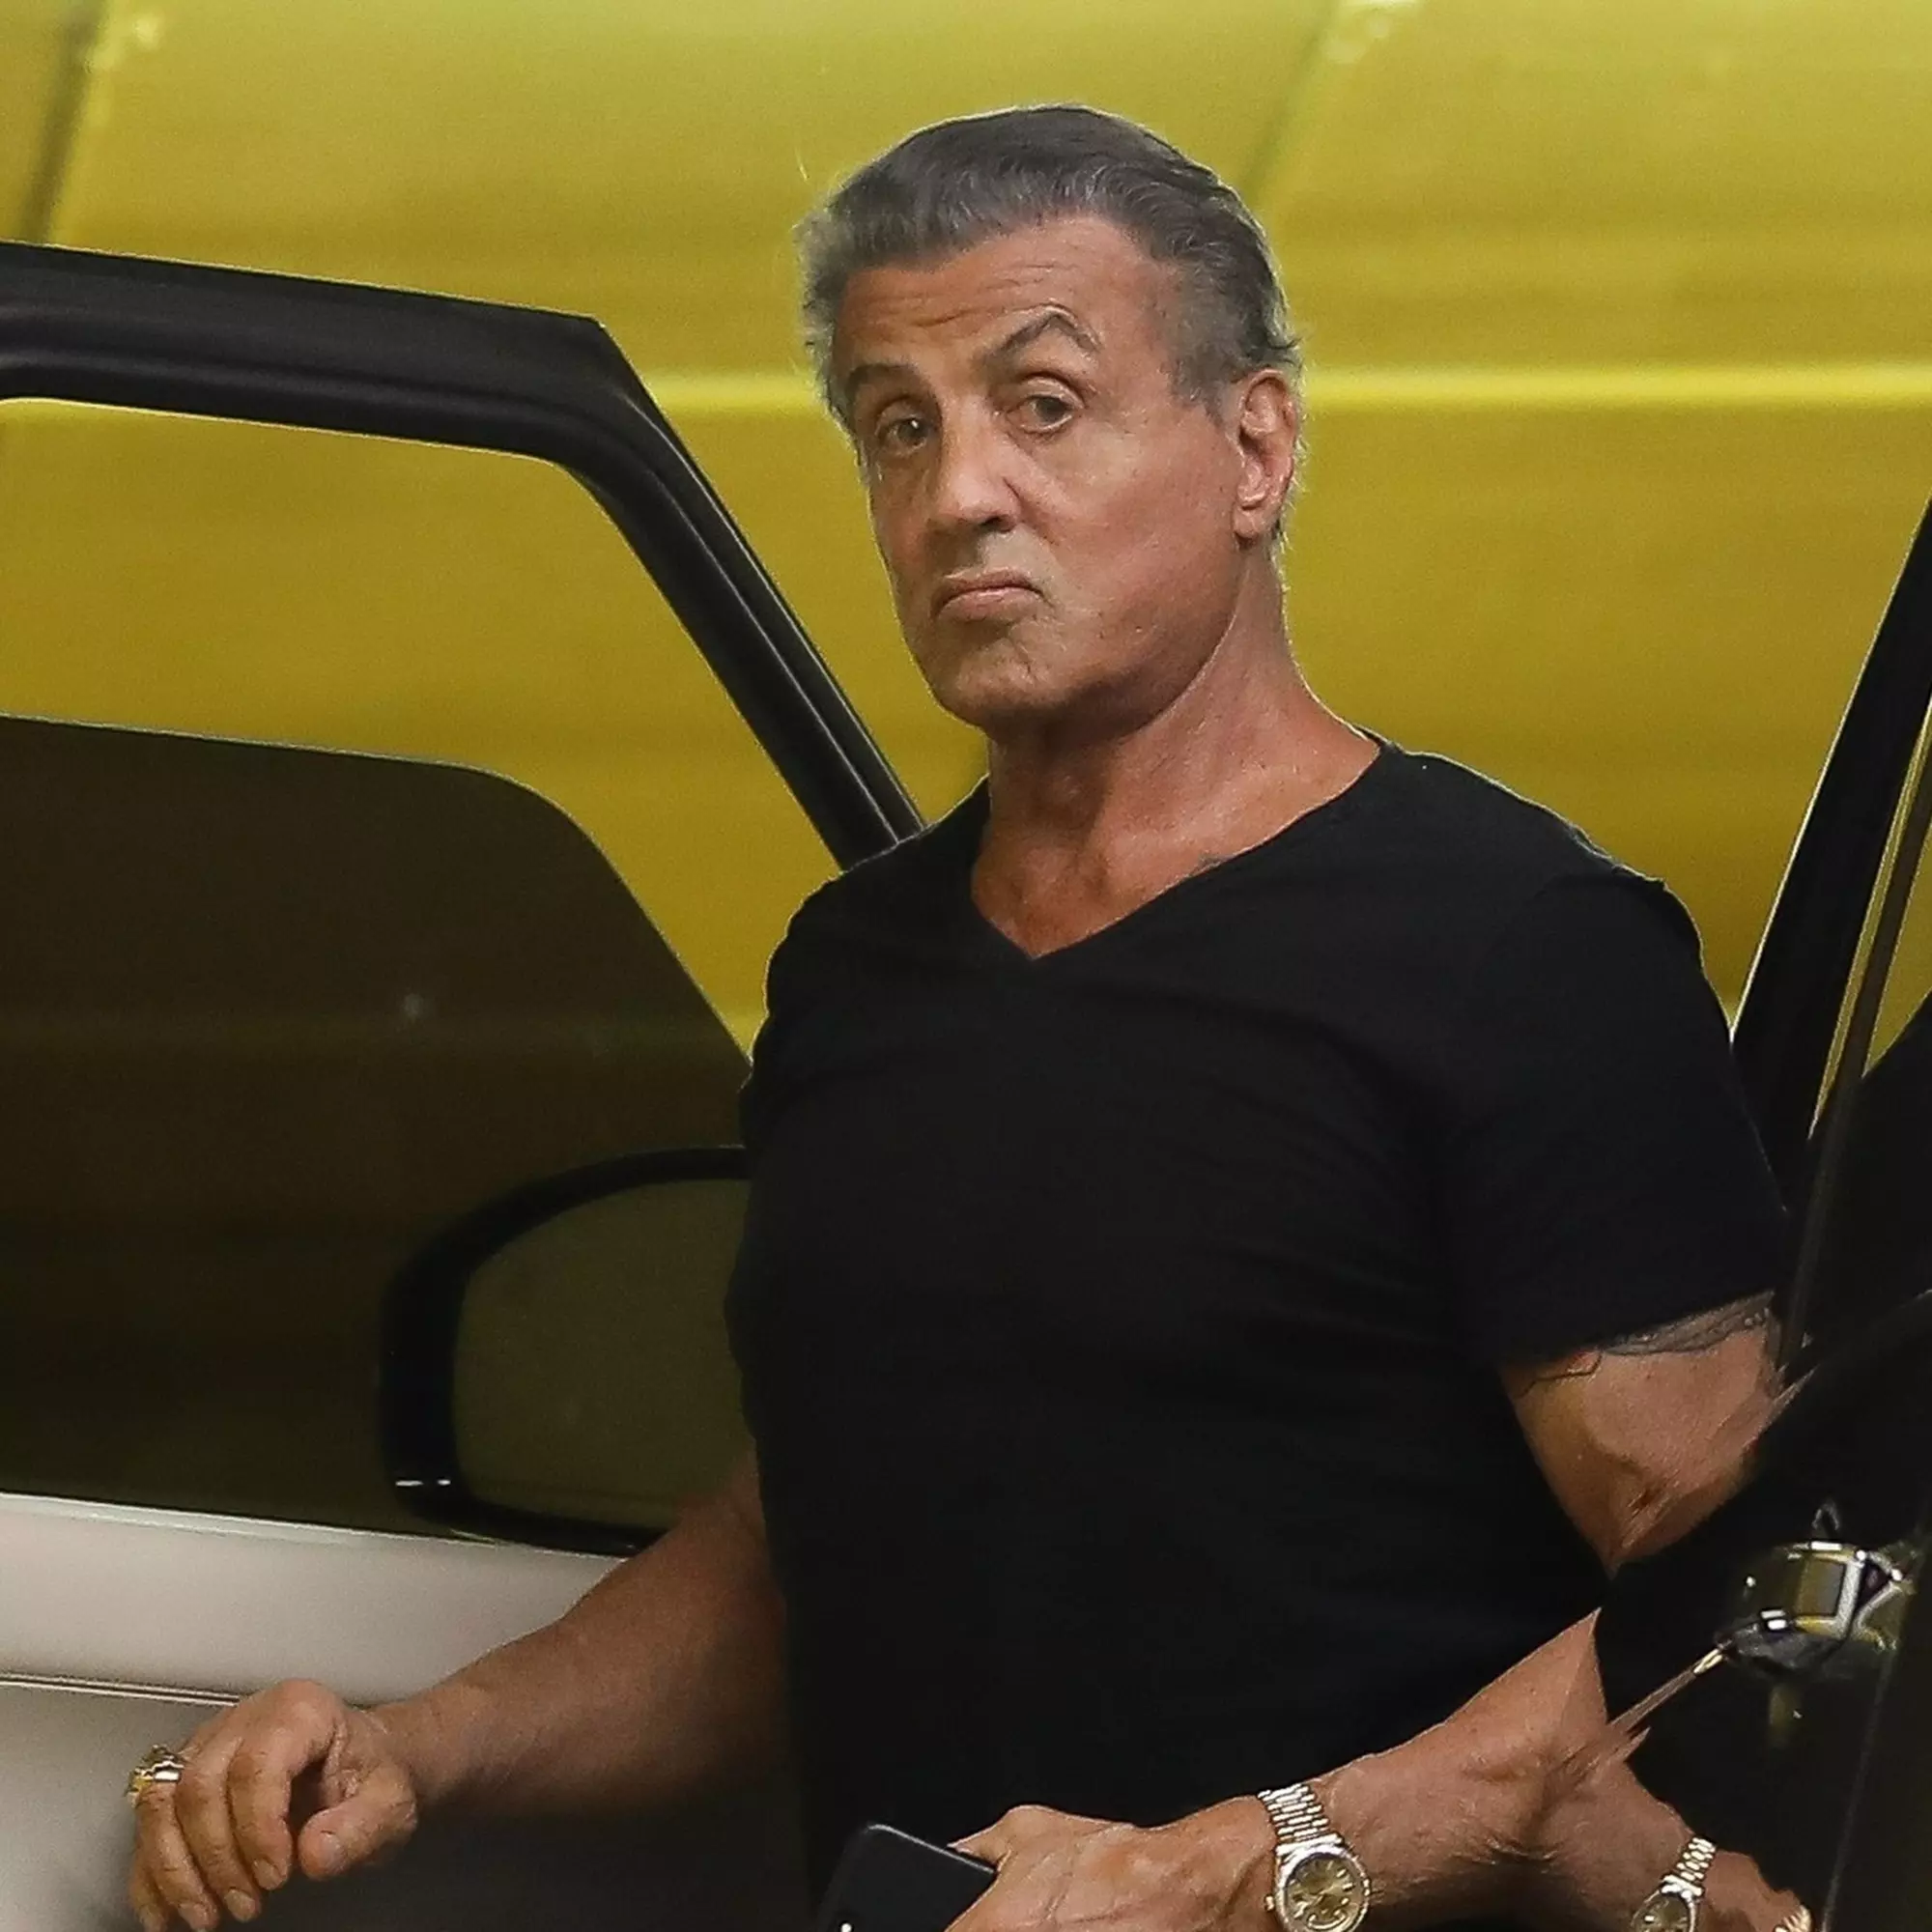 *EXCLUSIVE* Sylvester Stallone says Hi ahead of a sweaty session